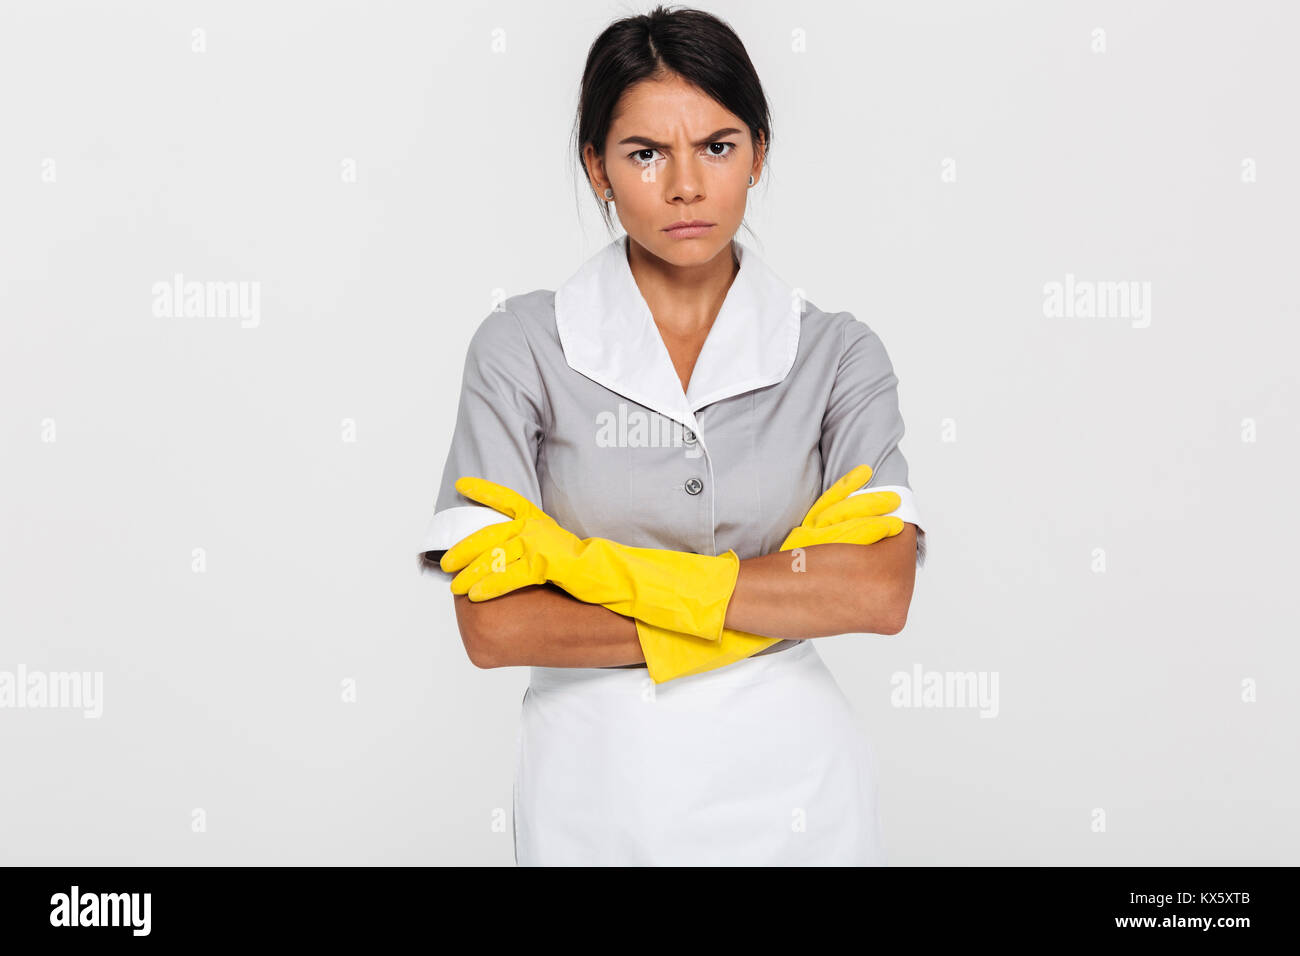 Portrait of grumpy attractve maid in uniform and yellow rubber gloves standing with crossed hands and looking at camera, isolated on white background Stock Photo